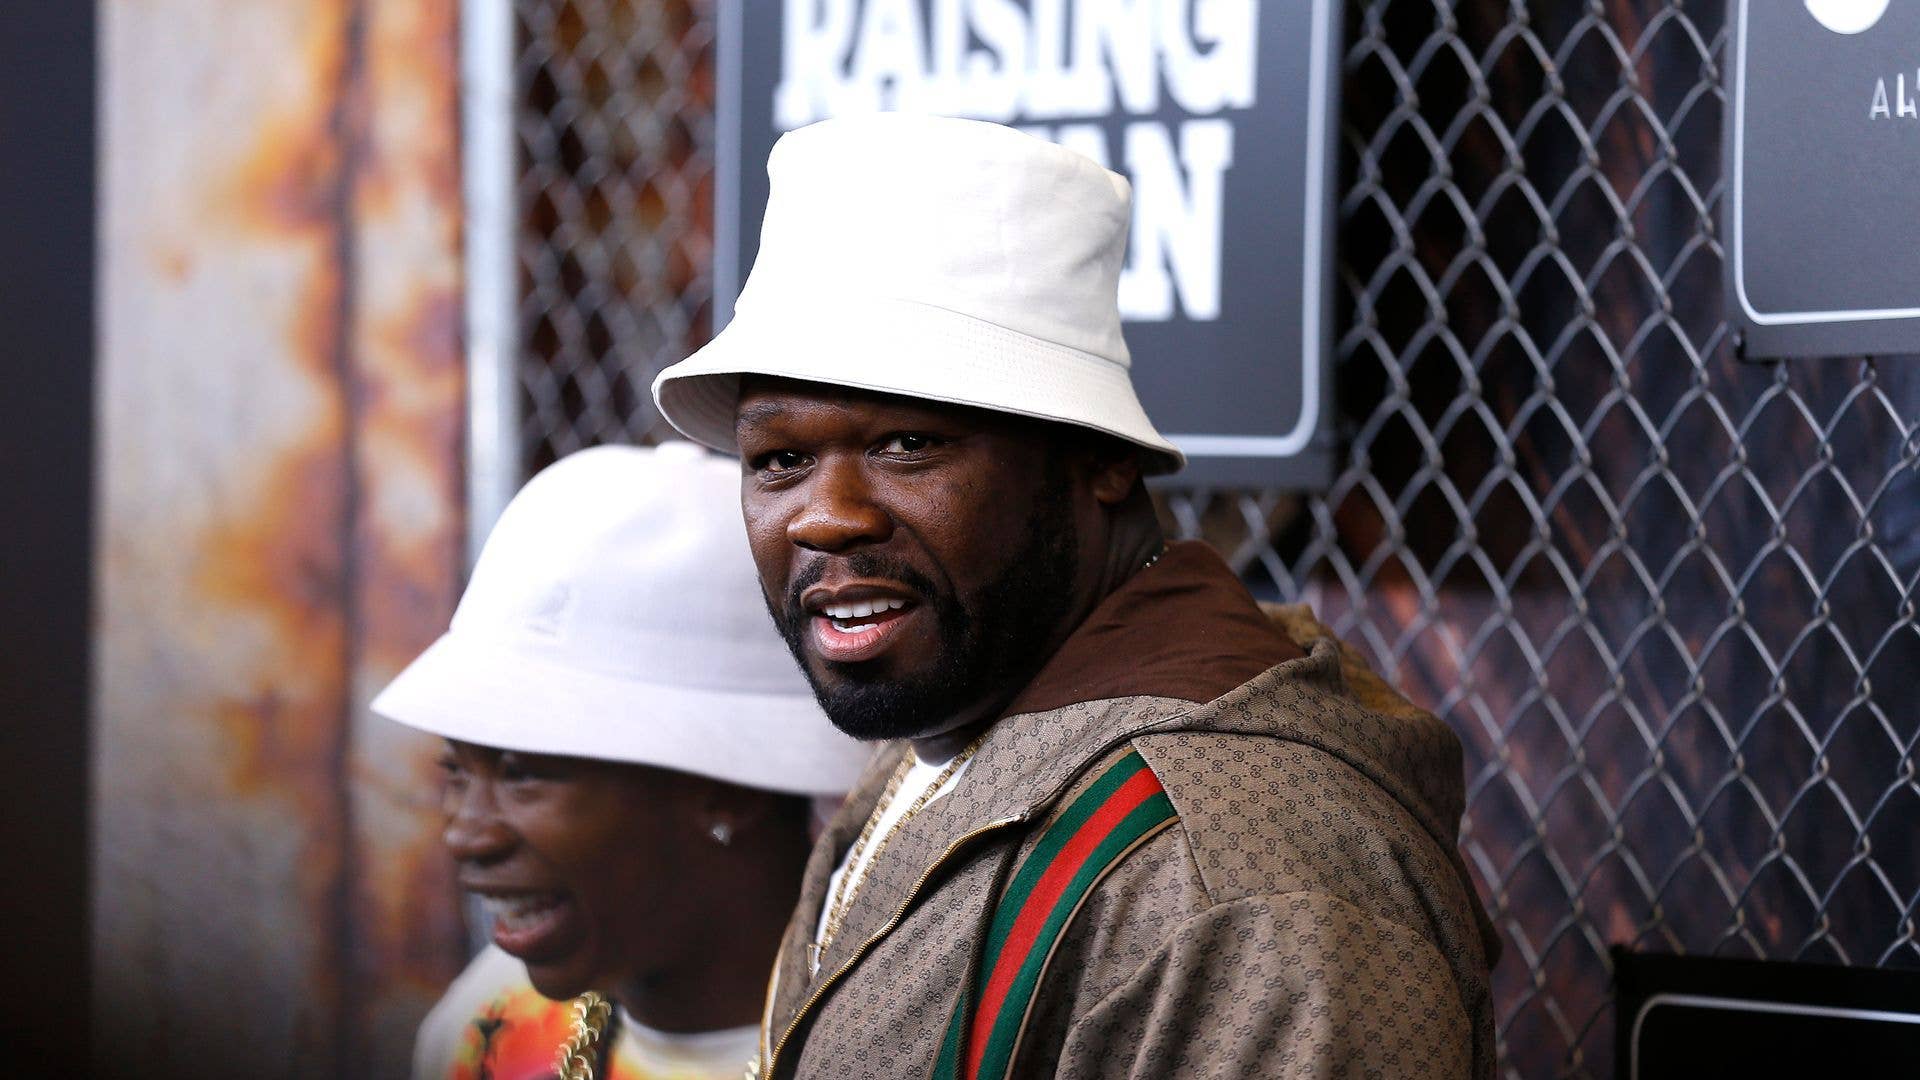 50 Cent Brings Up Gucci Taunting Jeezy Over Friend’s Death While Joking ...